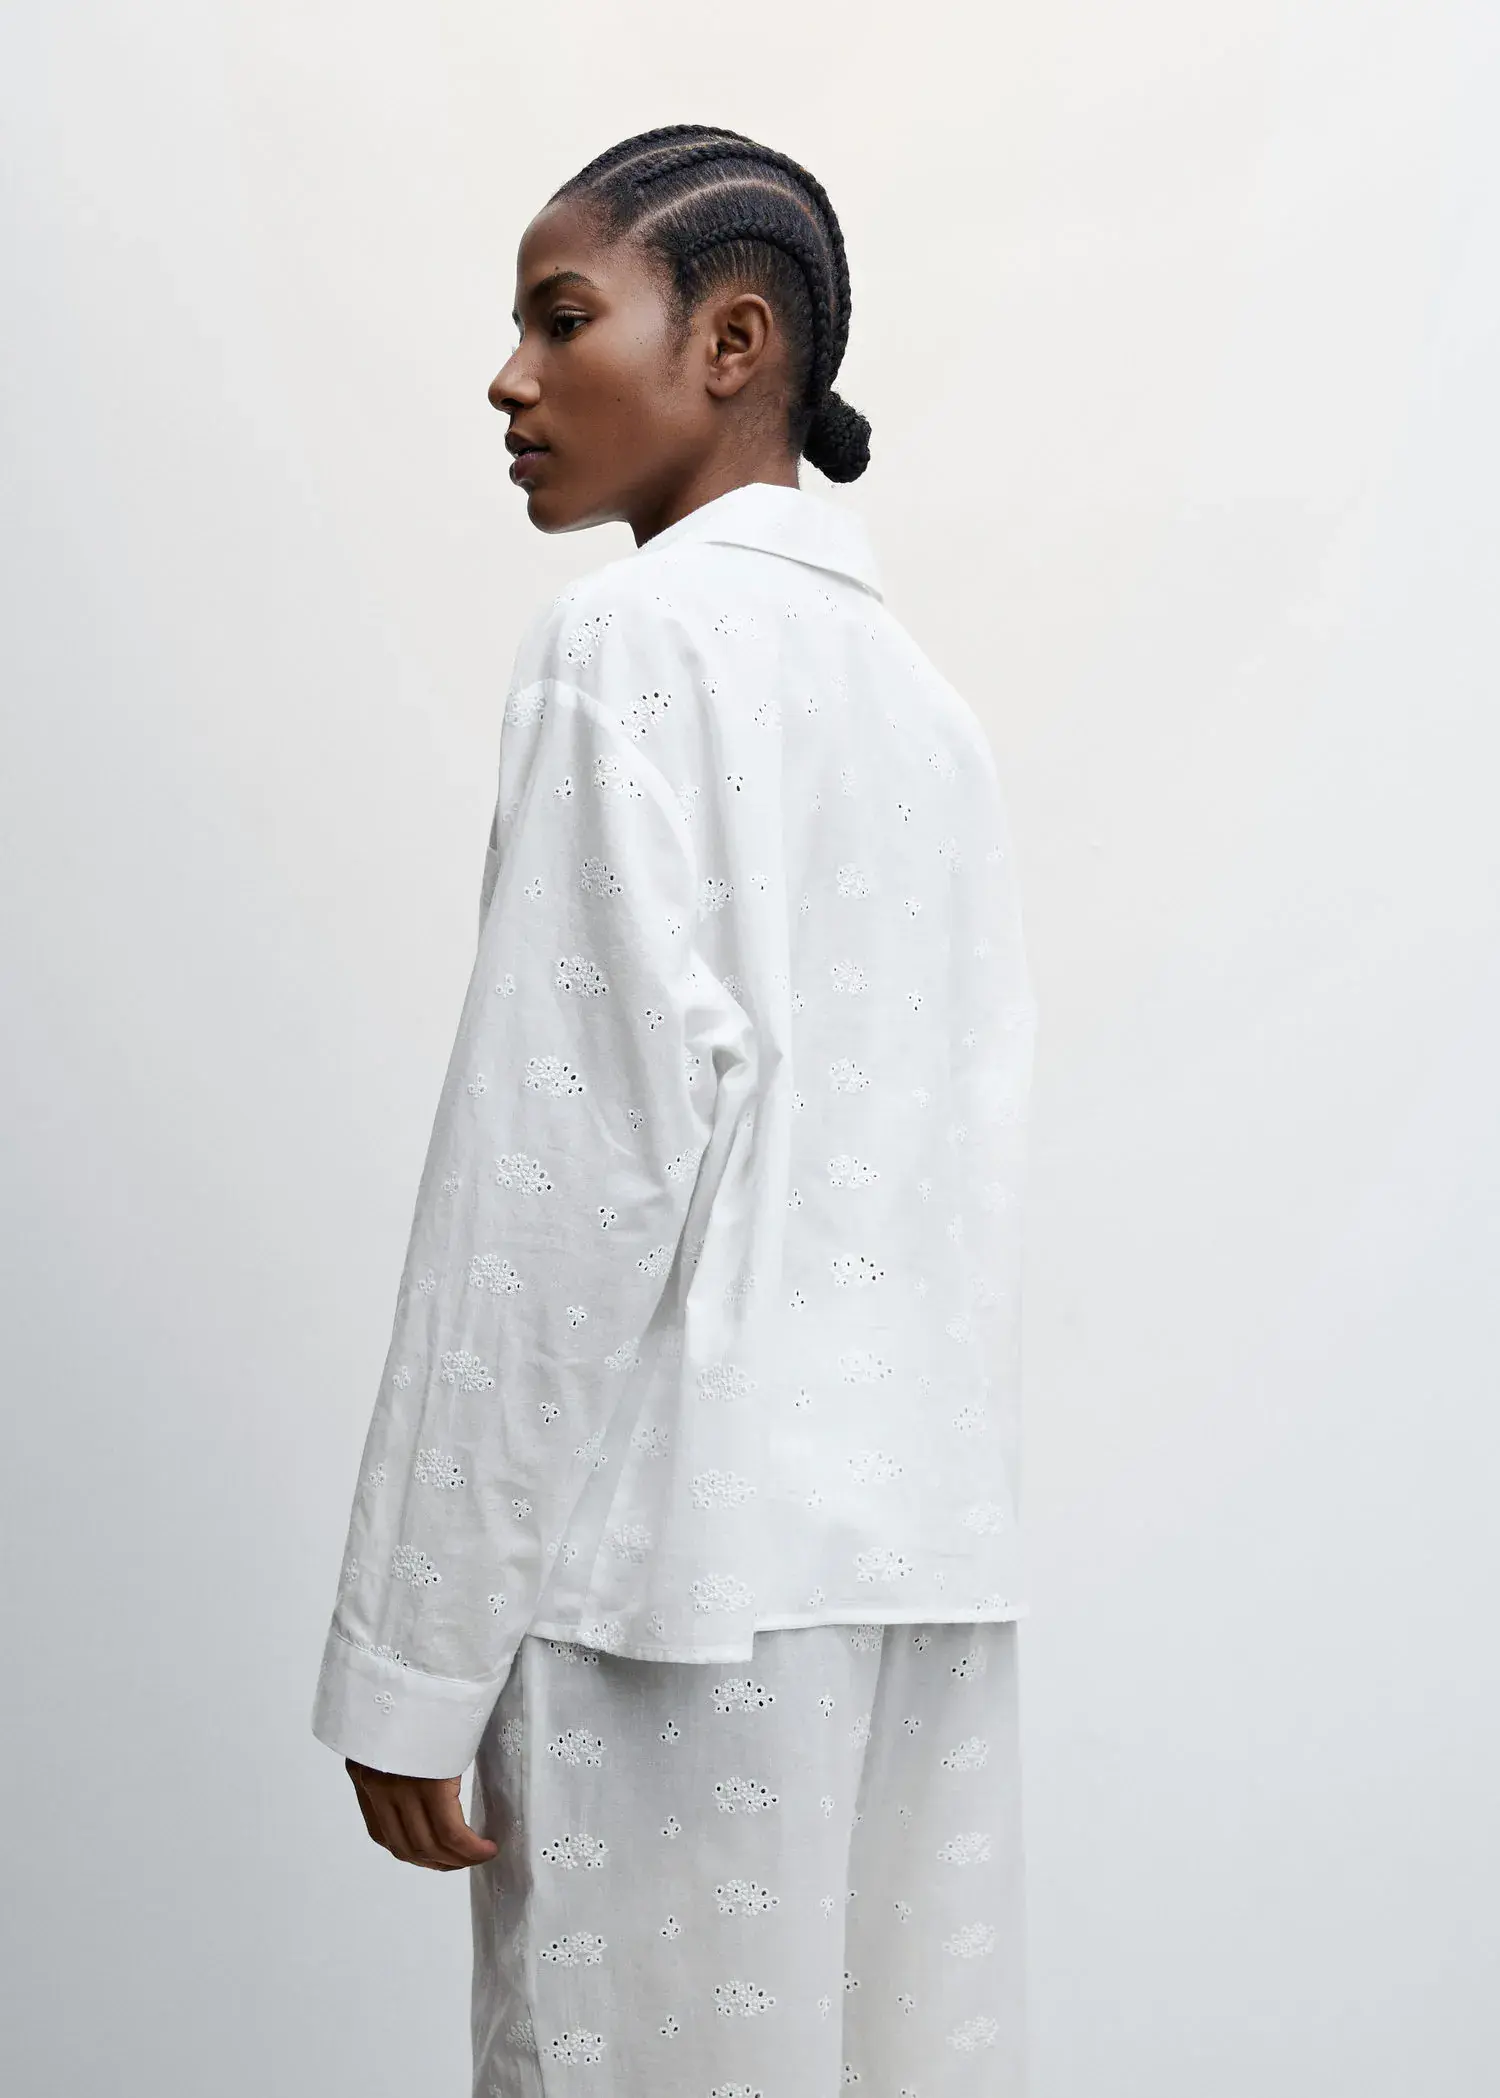 Mango Pajama shirt with openwork details. a person wearing a white shirt and white pants. 